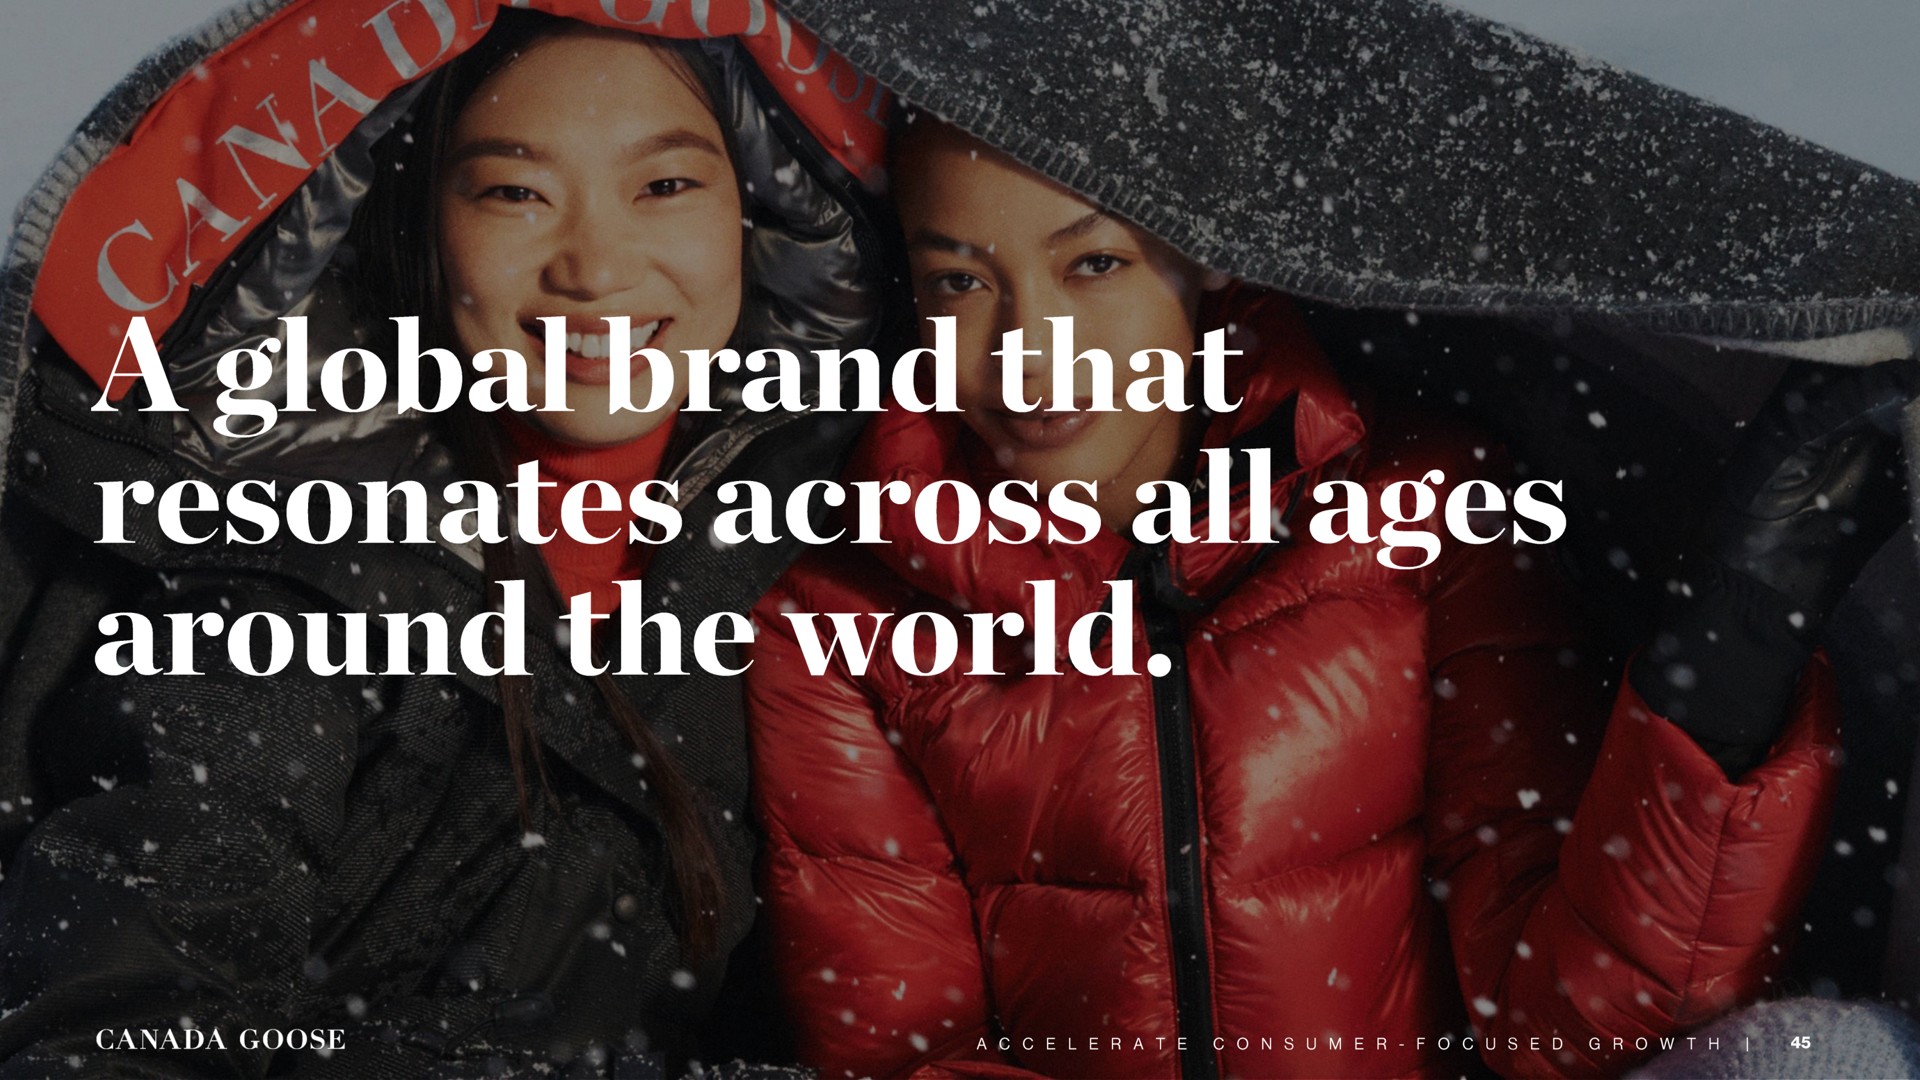 resonates across all ages around the world | Canada Goose